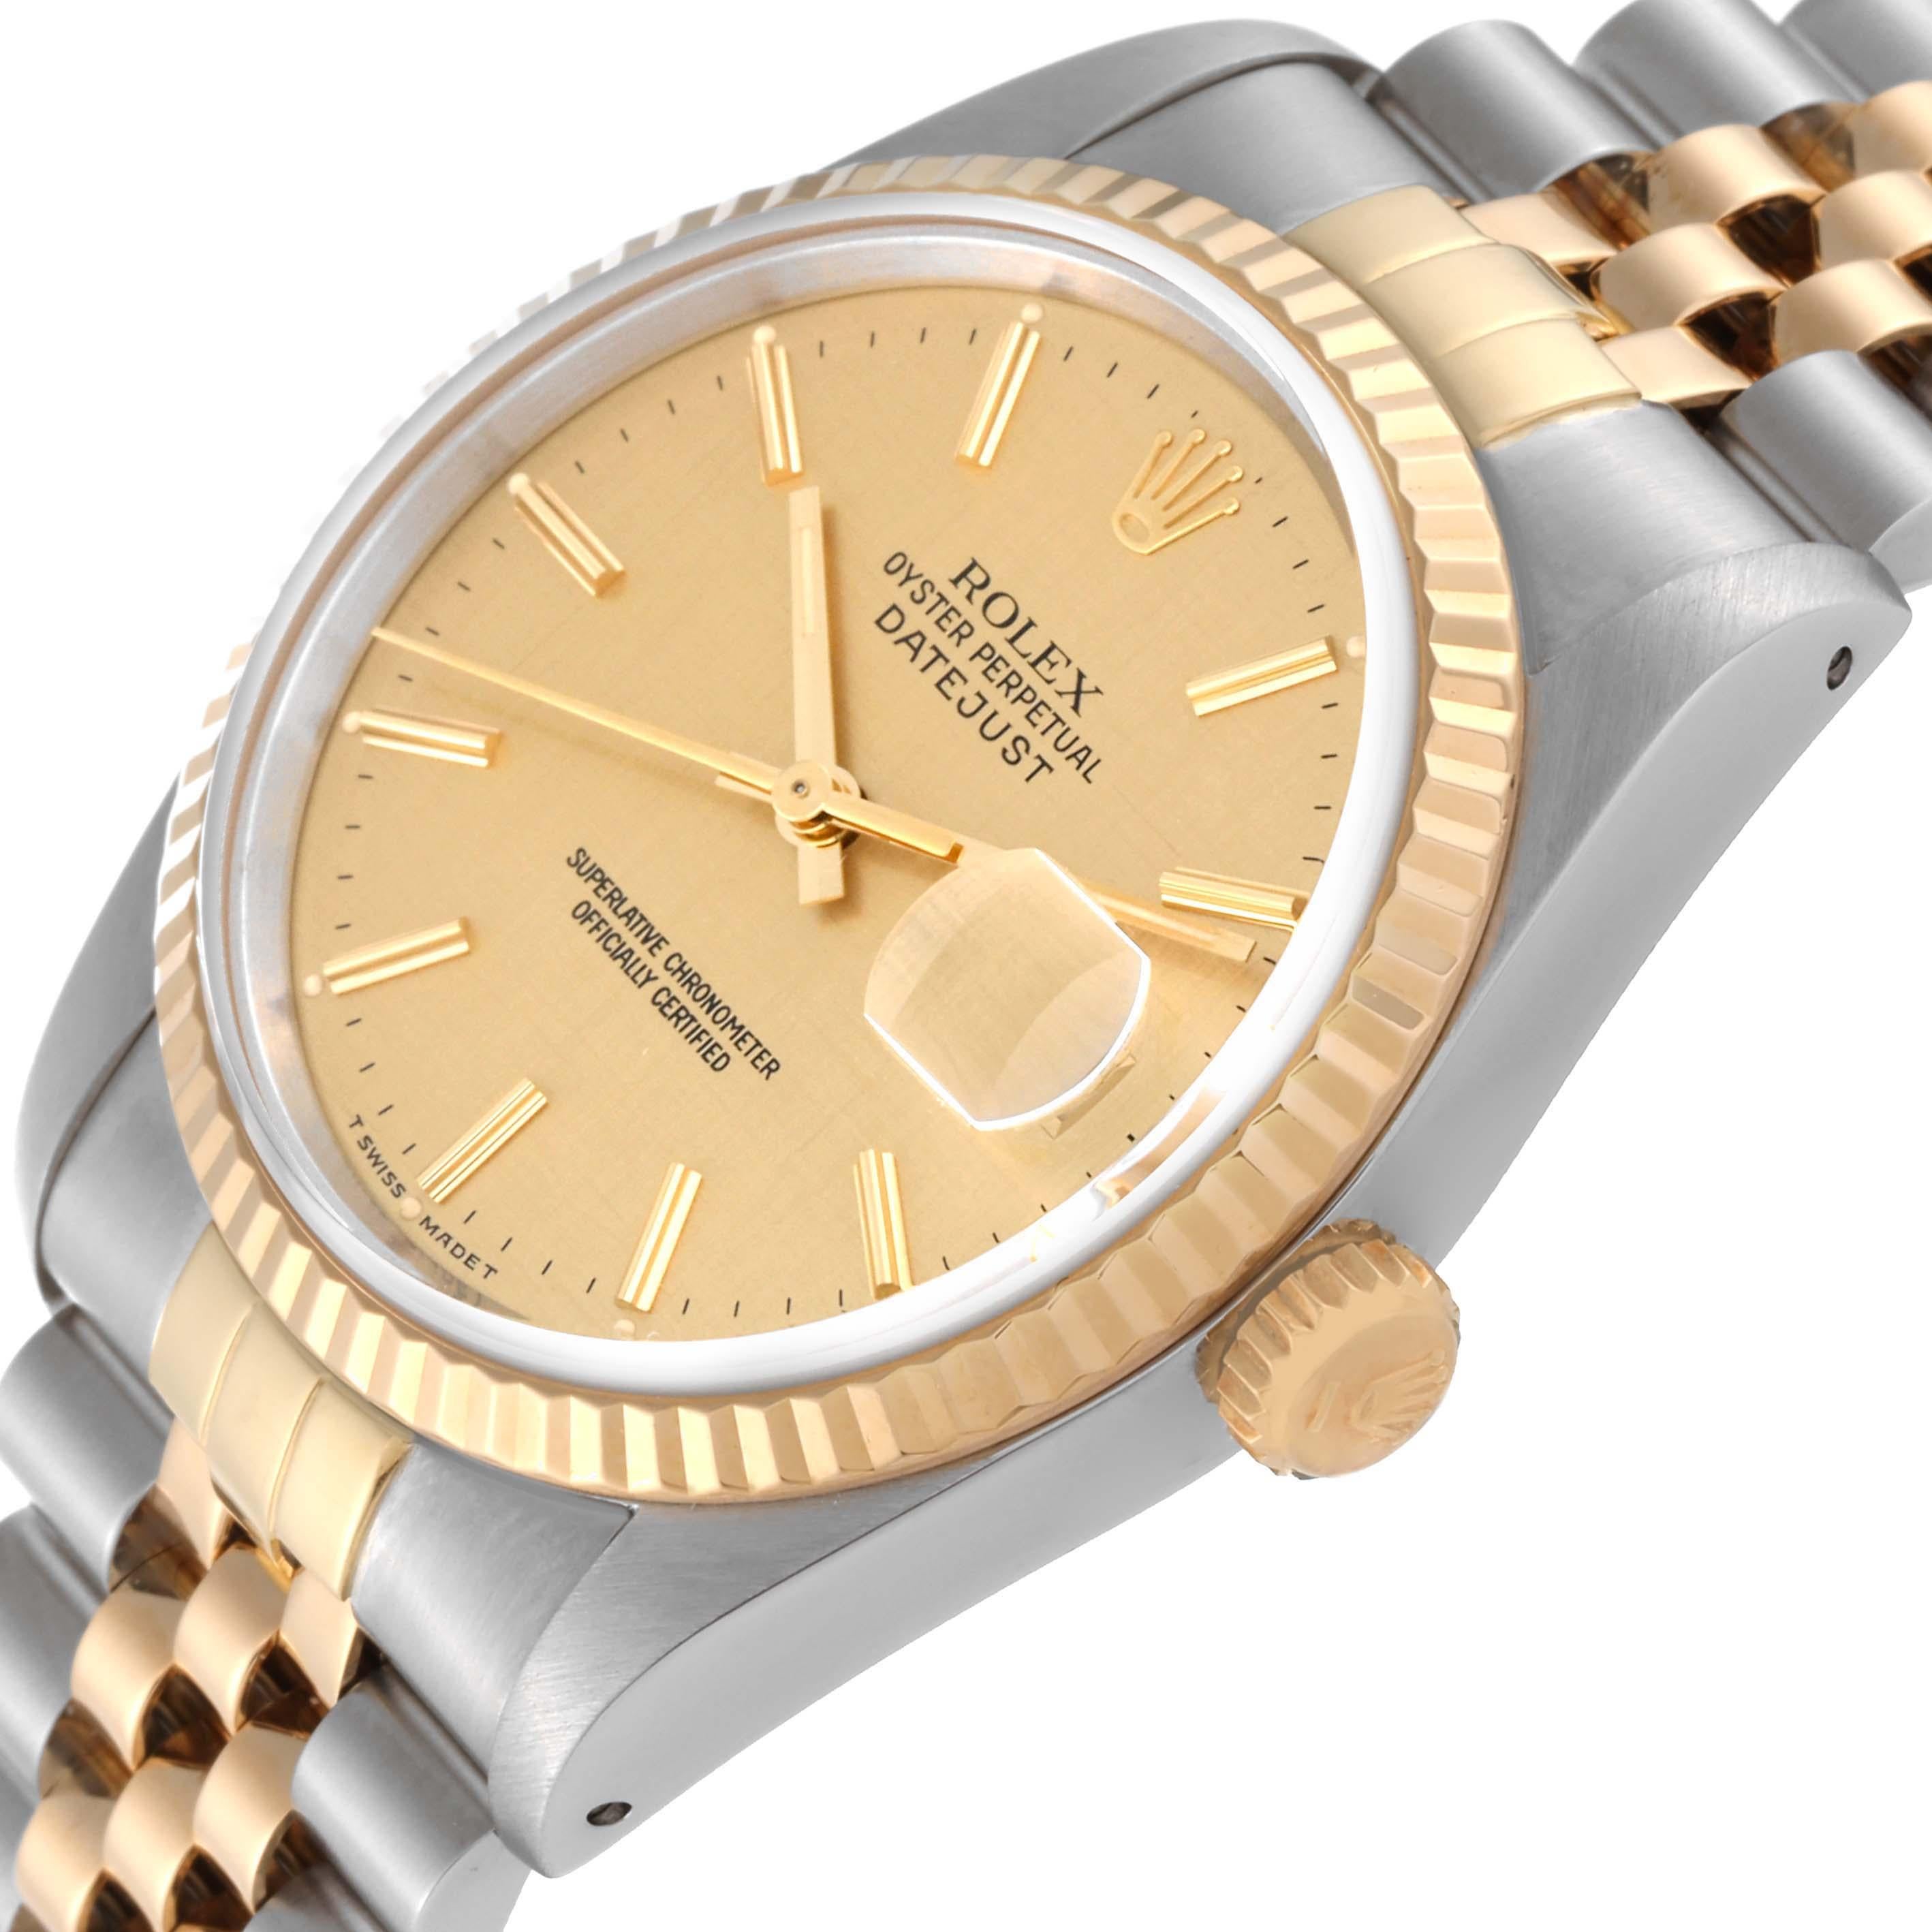 Rolex Datejust 36 Steel Yellow Gold Champagne Linen Dial Mens Watch 16233 For Sale 2